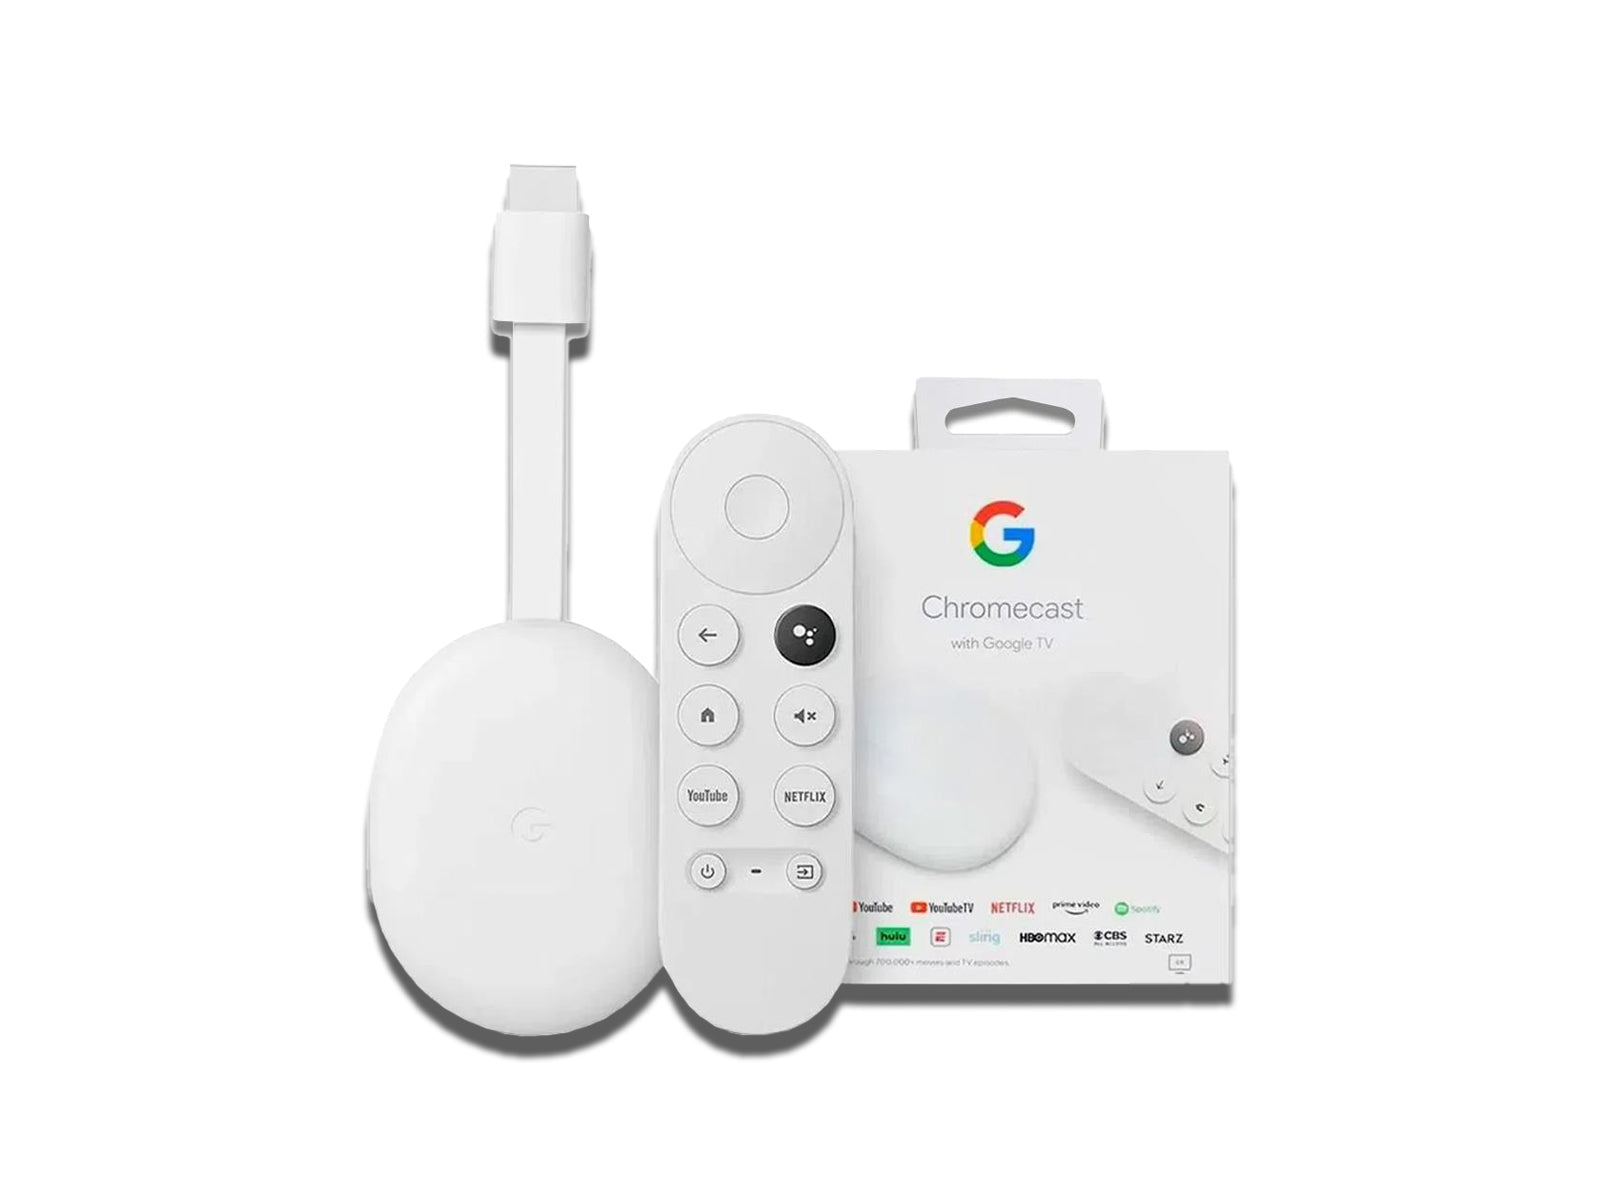 Image Showing Chromecast, Remote Control And Box on The White Background